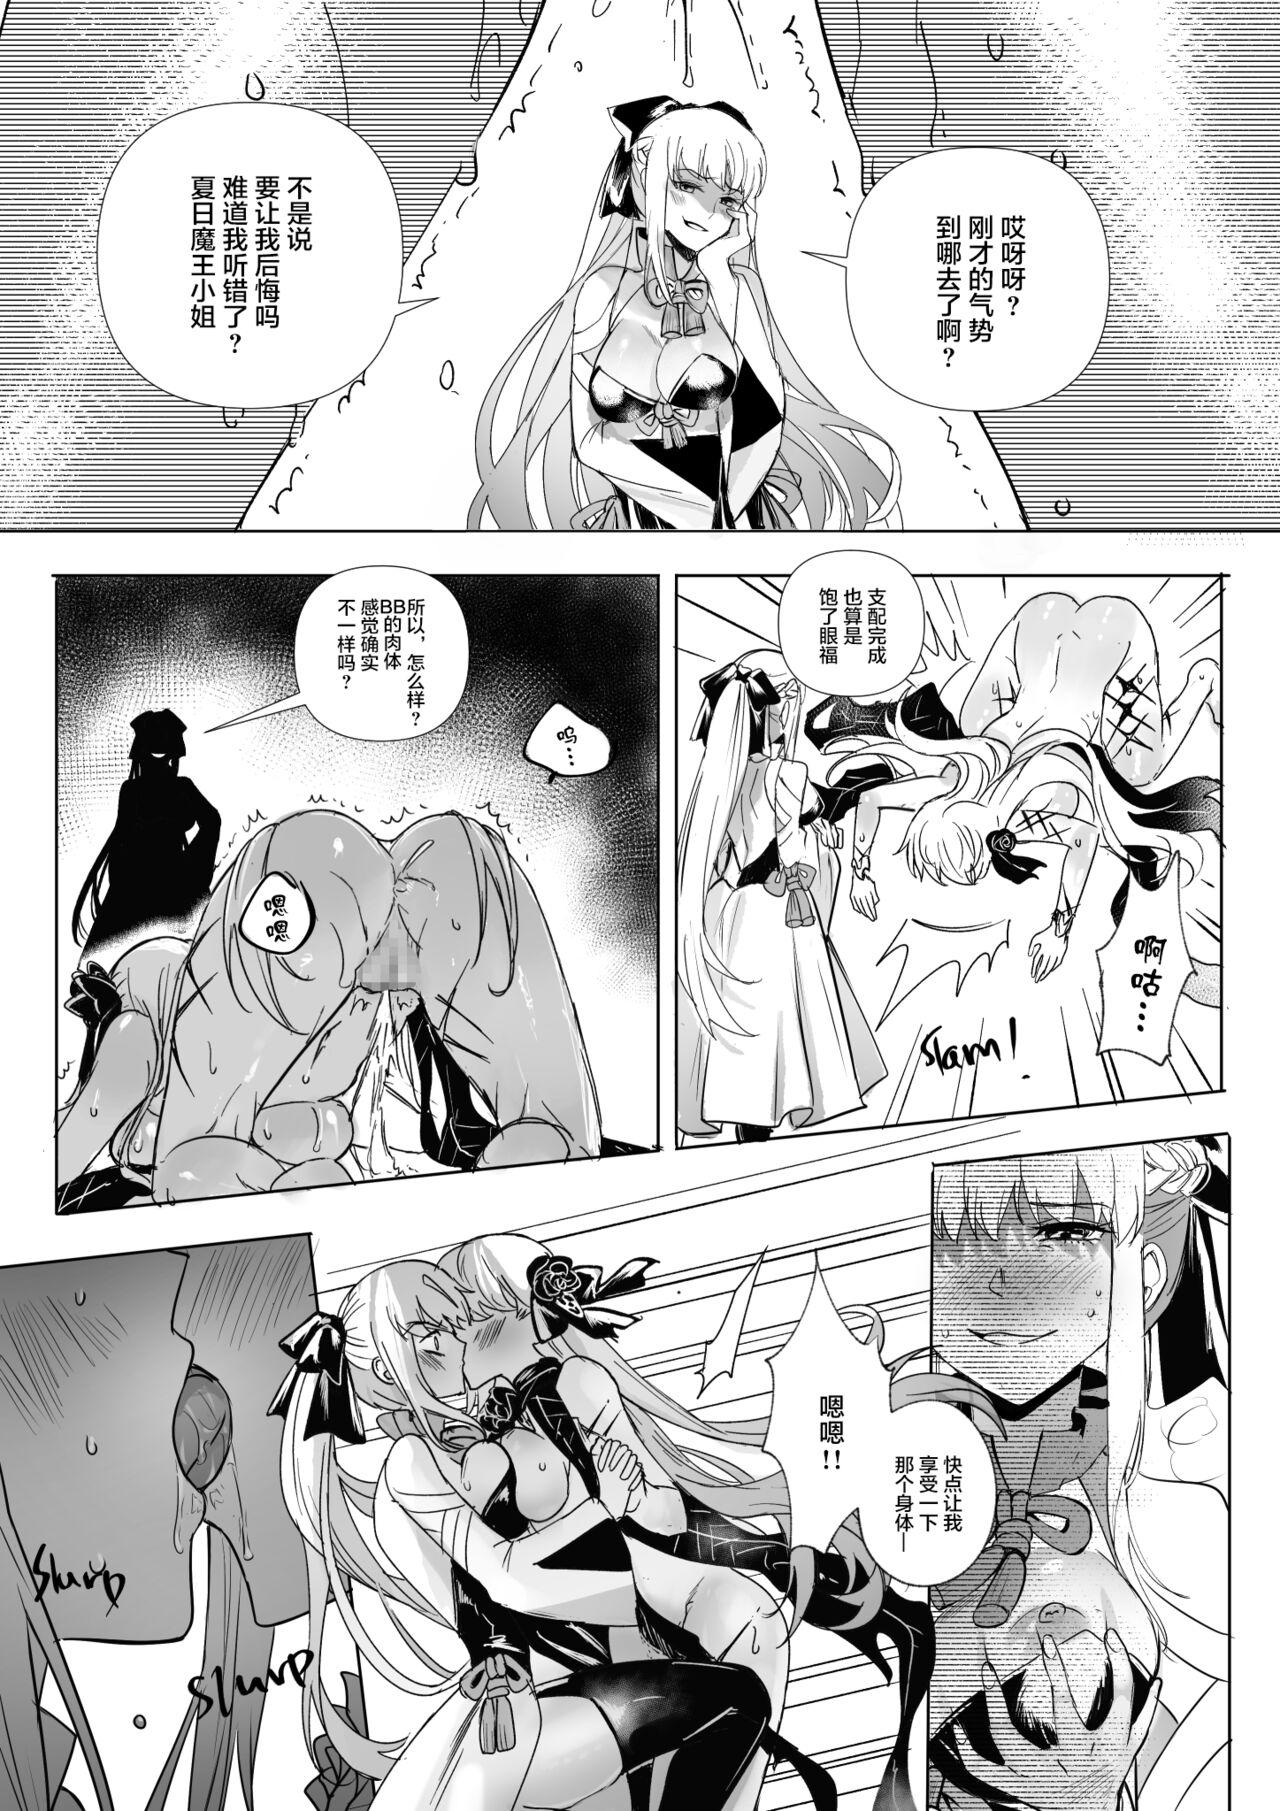 Family Roleplay FGO モルガン&水着カーマ憑依 - Fate grand order Leaked - Page 9